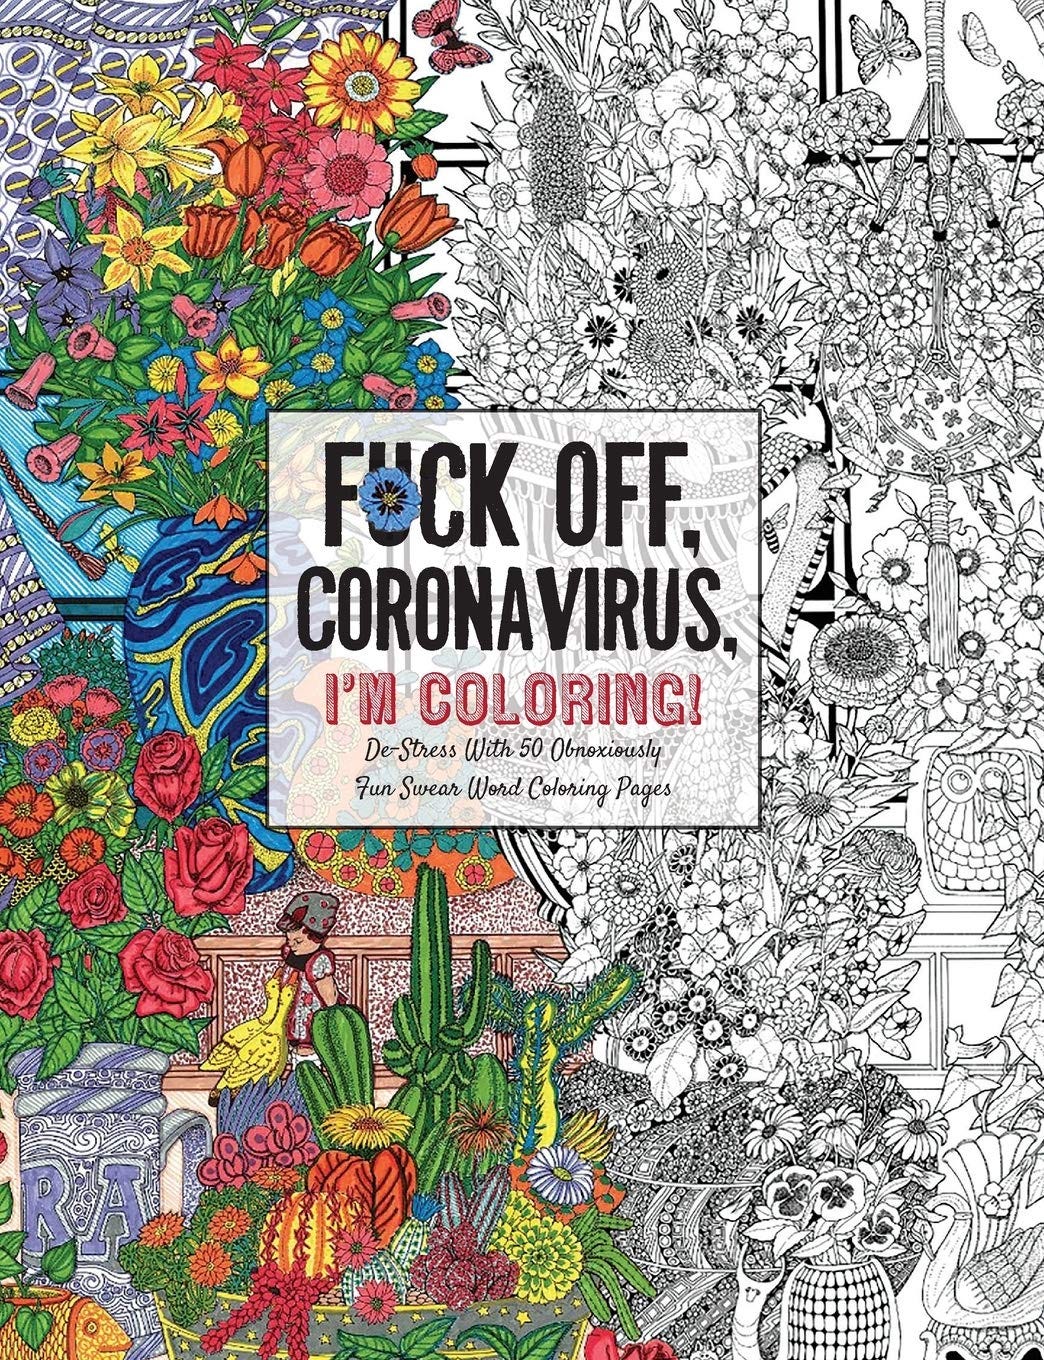 Feels and Other Shit - A Sweary Self-Care Colouring Book